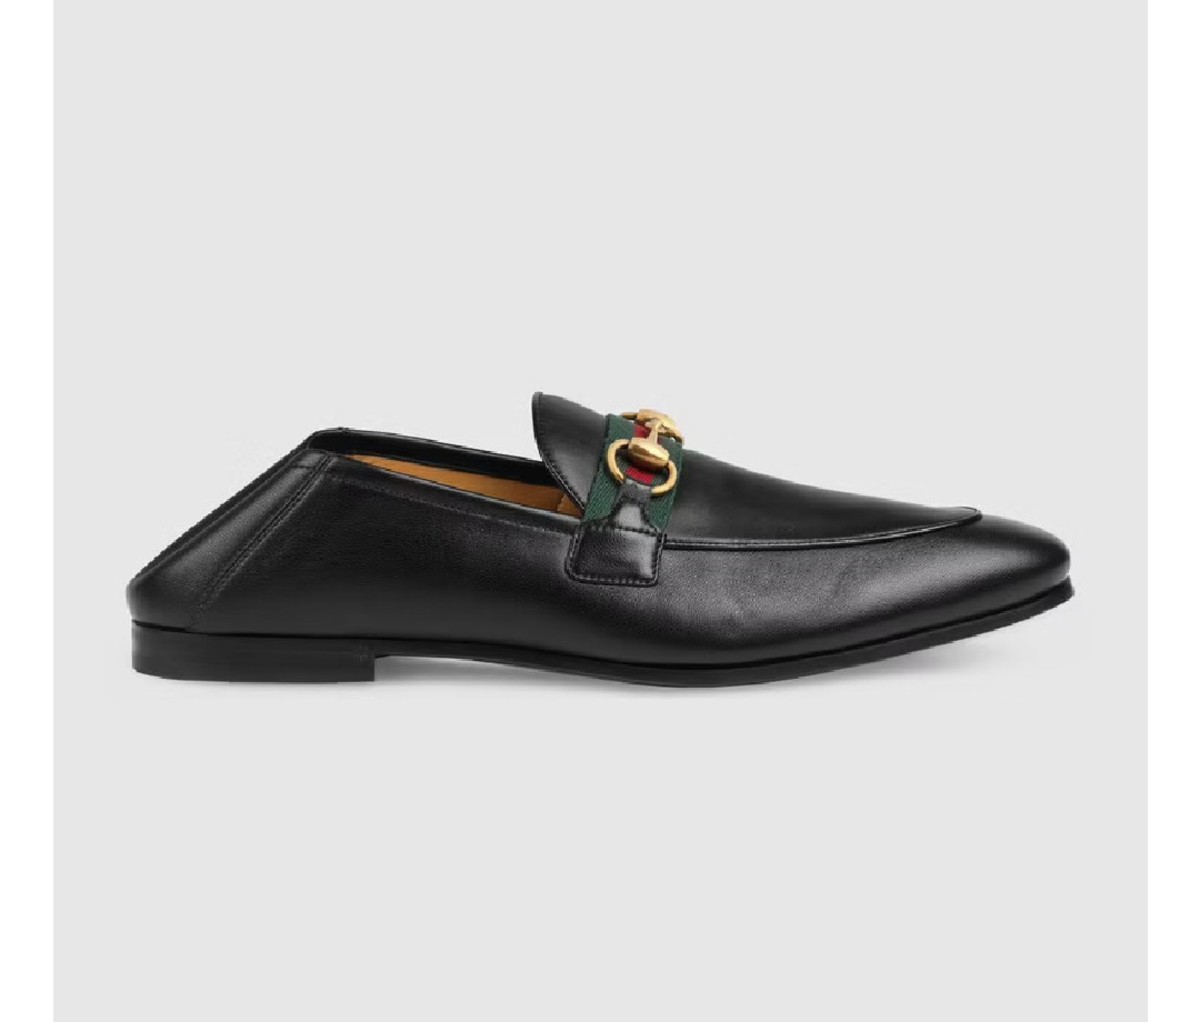 A Gucci Men's Leather Horsebit Loafer with Web